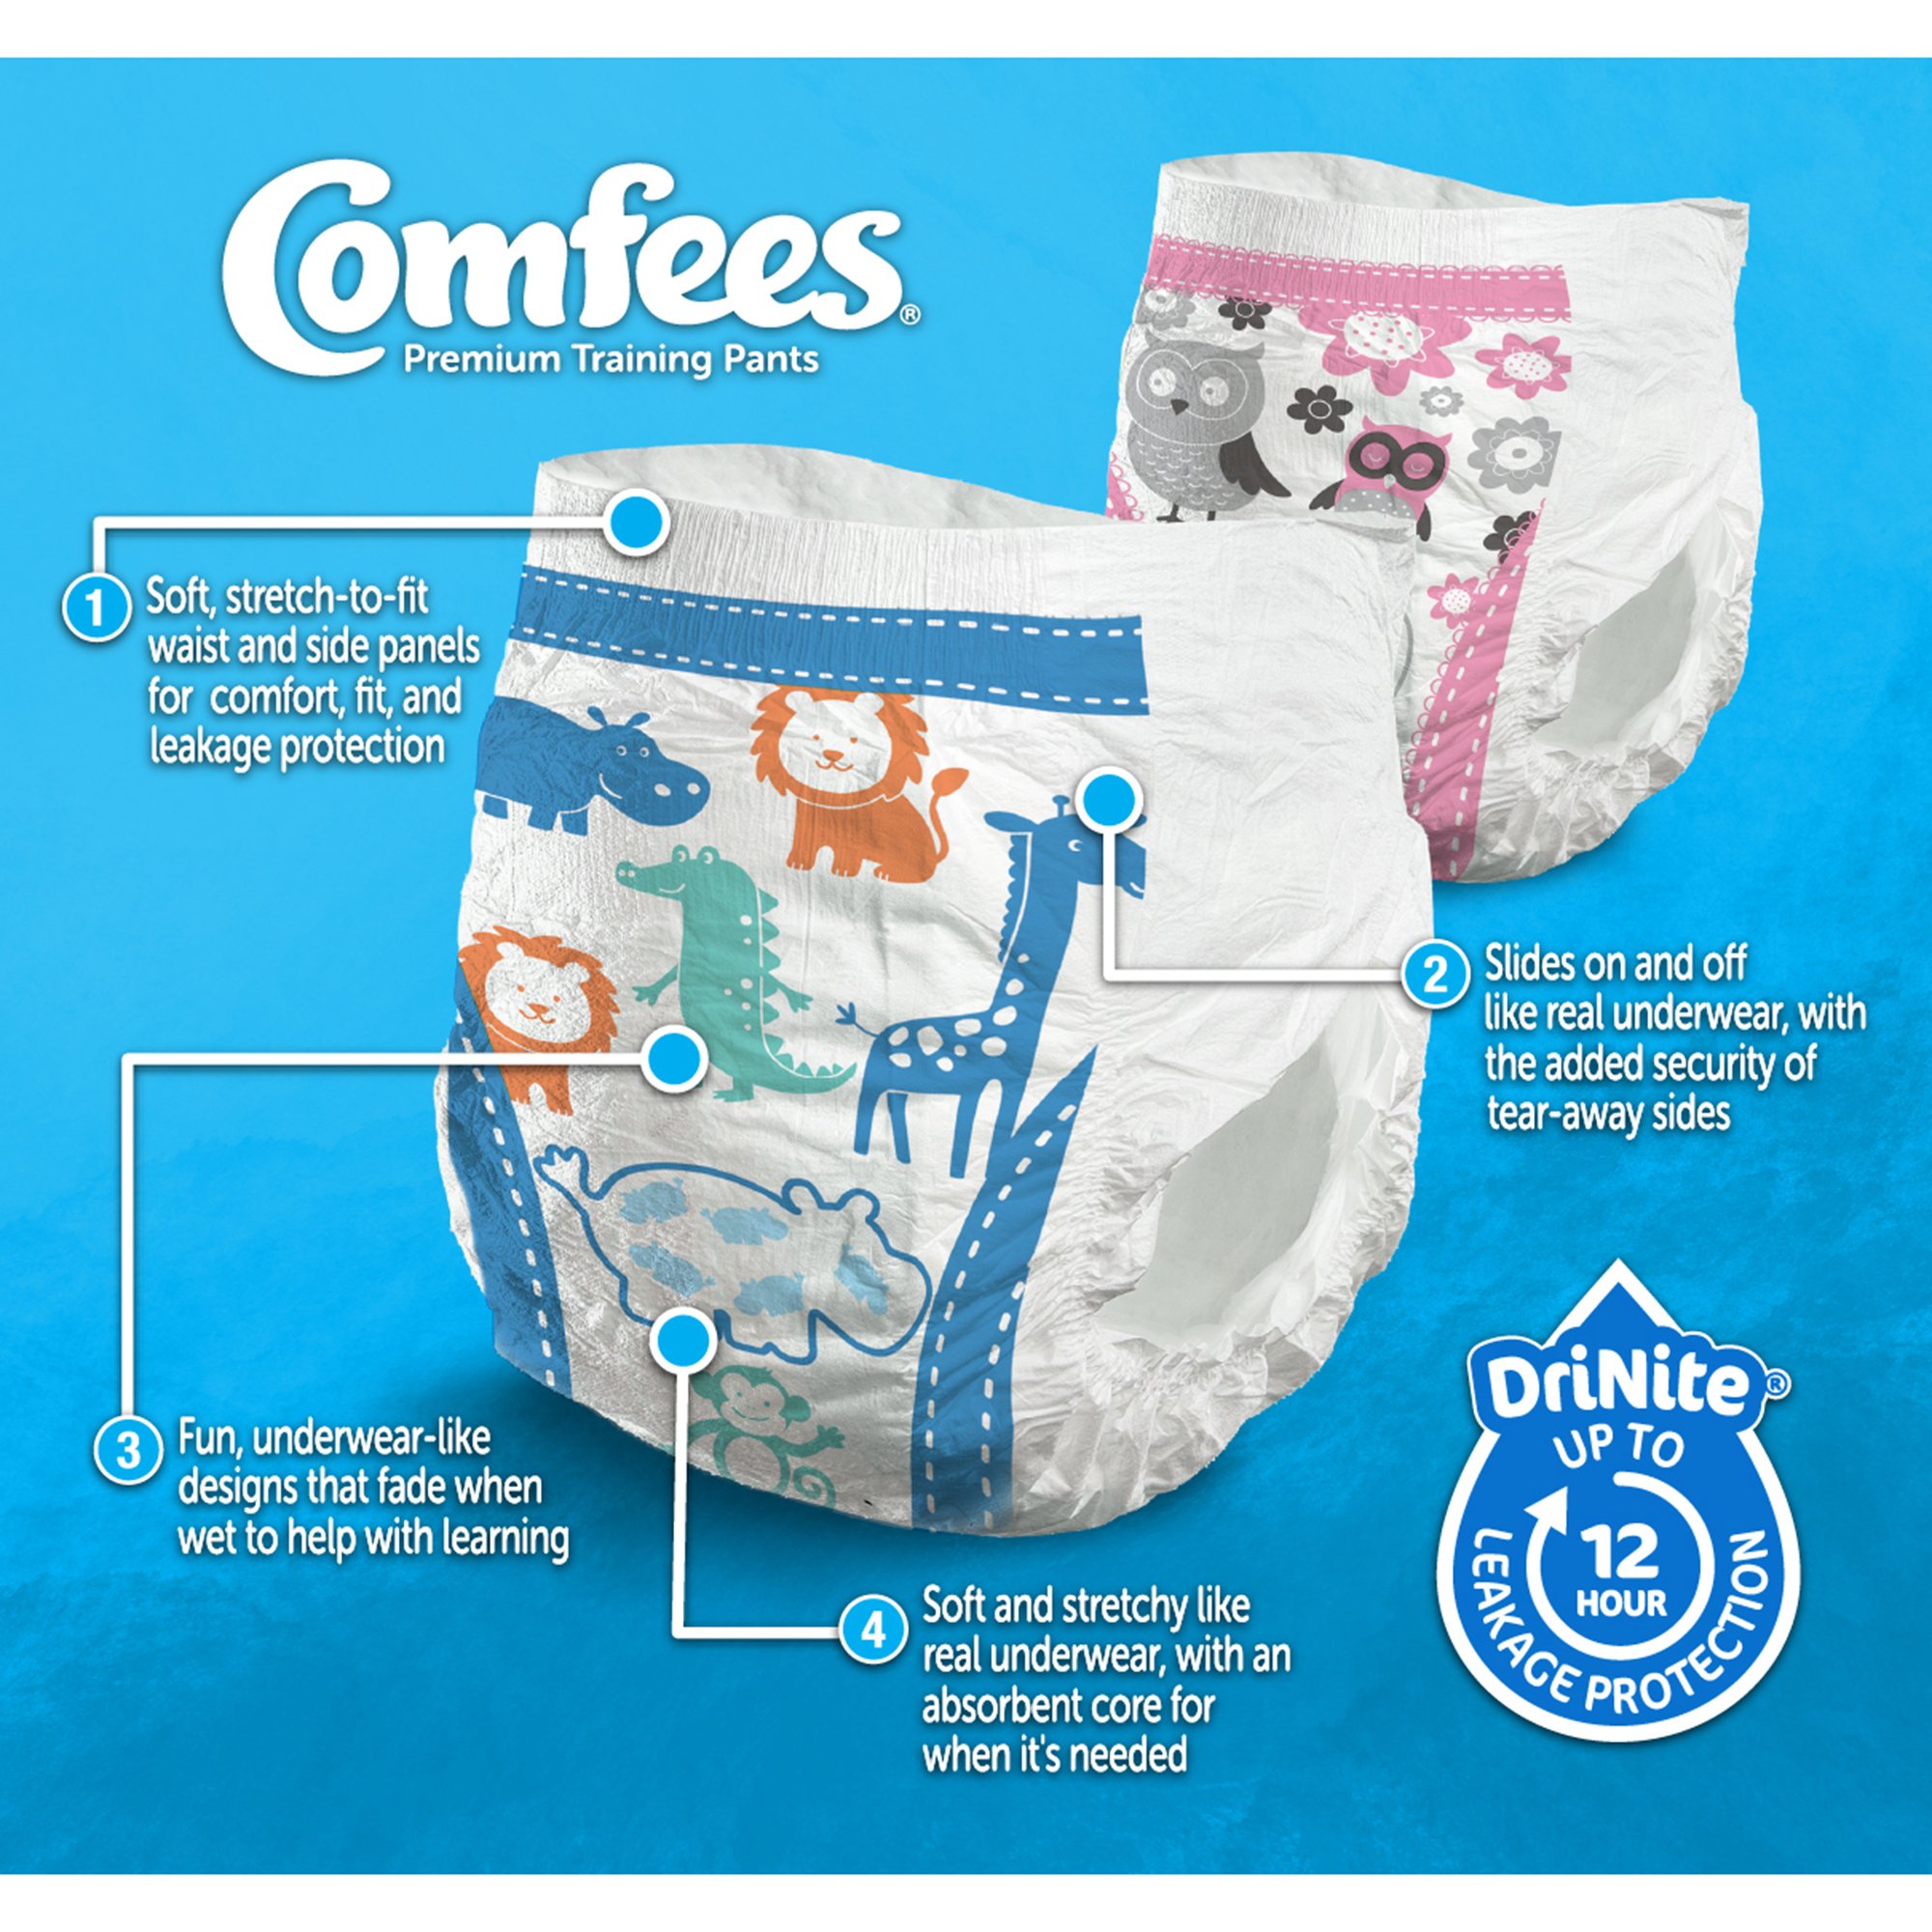 Comfees Training Pants for Girls, DriNite 12-hr Leakage Protection, 3T-4T, 23 Count, 6 Packs, 138 Total - image 5 of 5